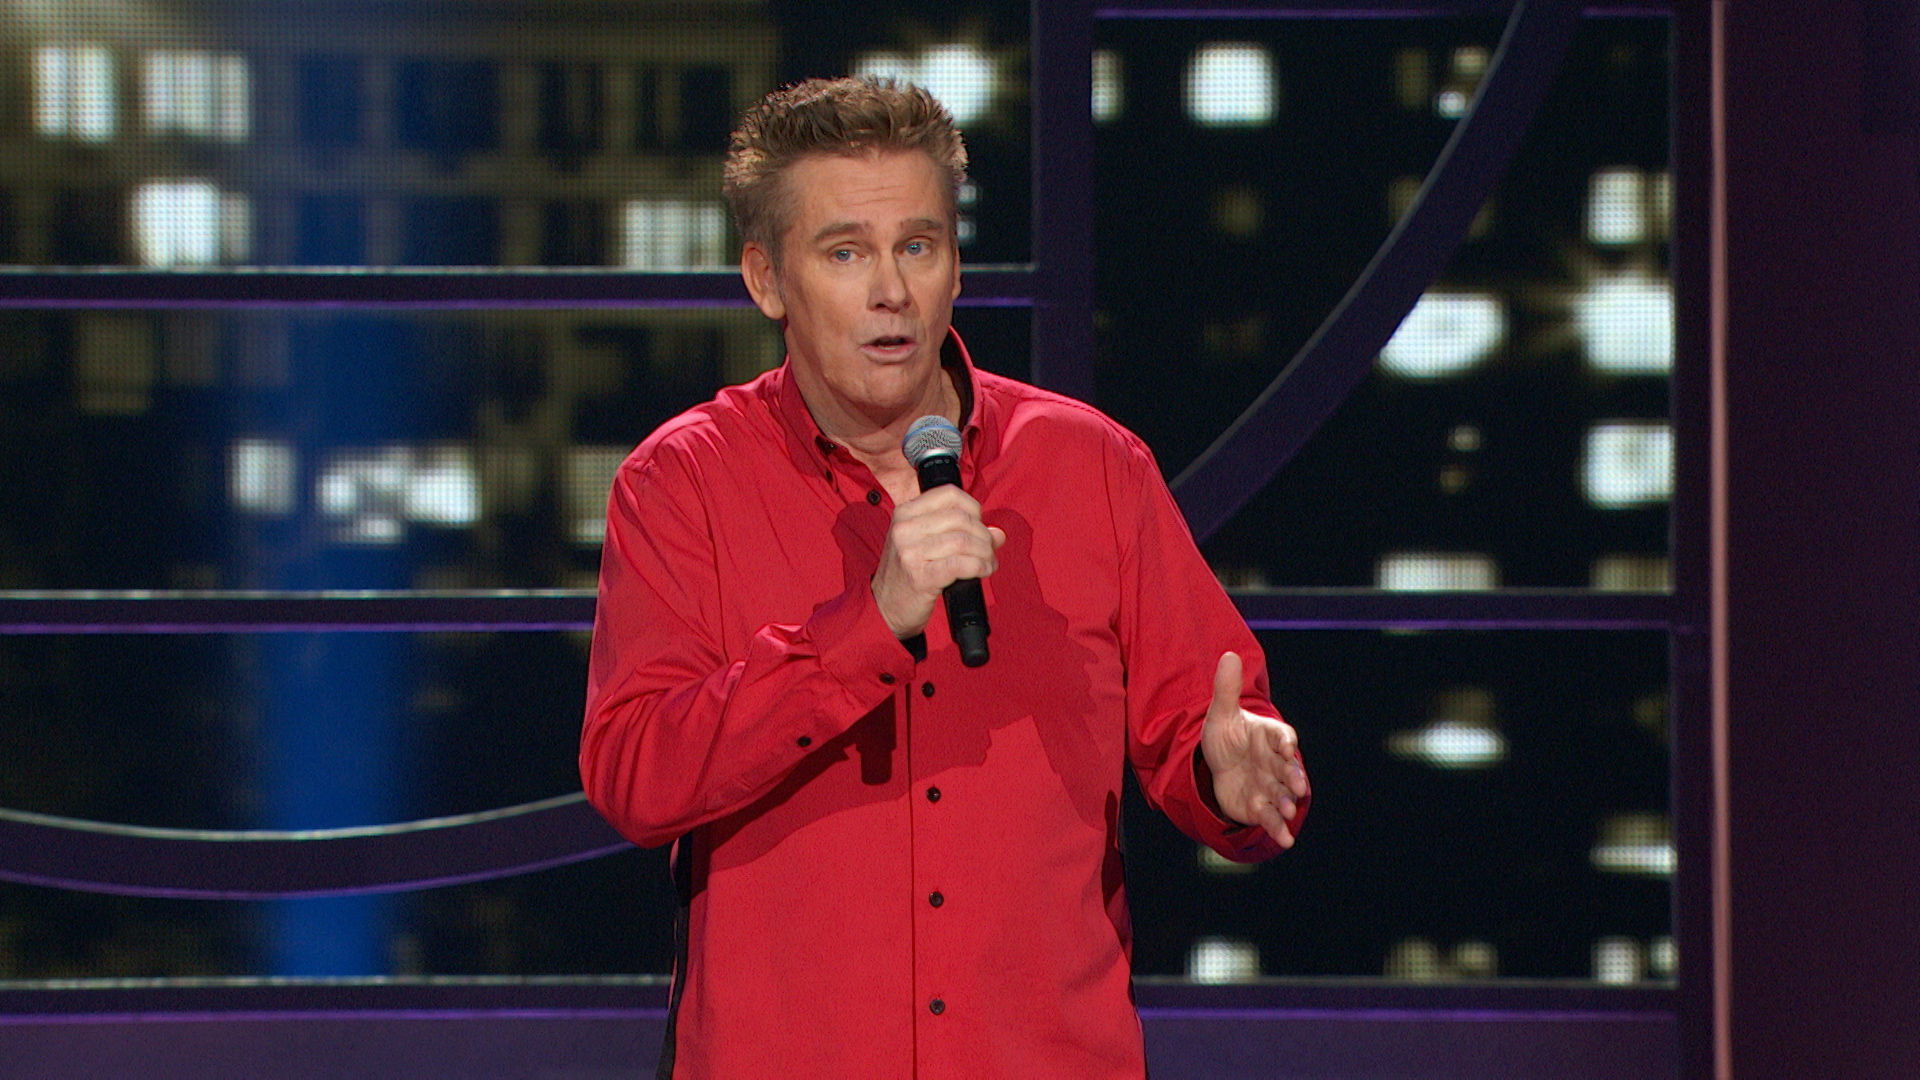 Highlights from Brian Regan LIVE on Comedy Central